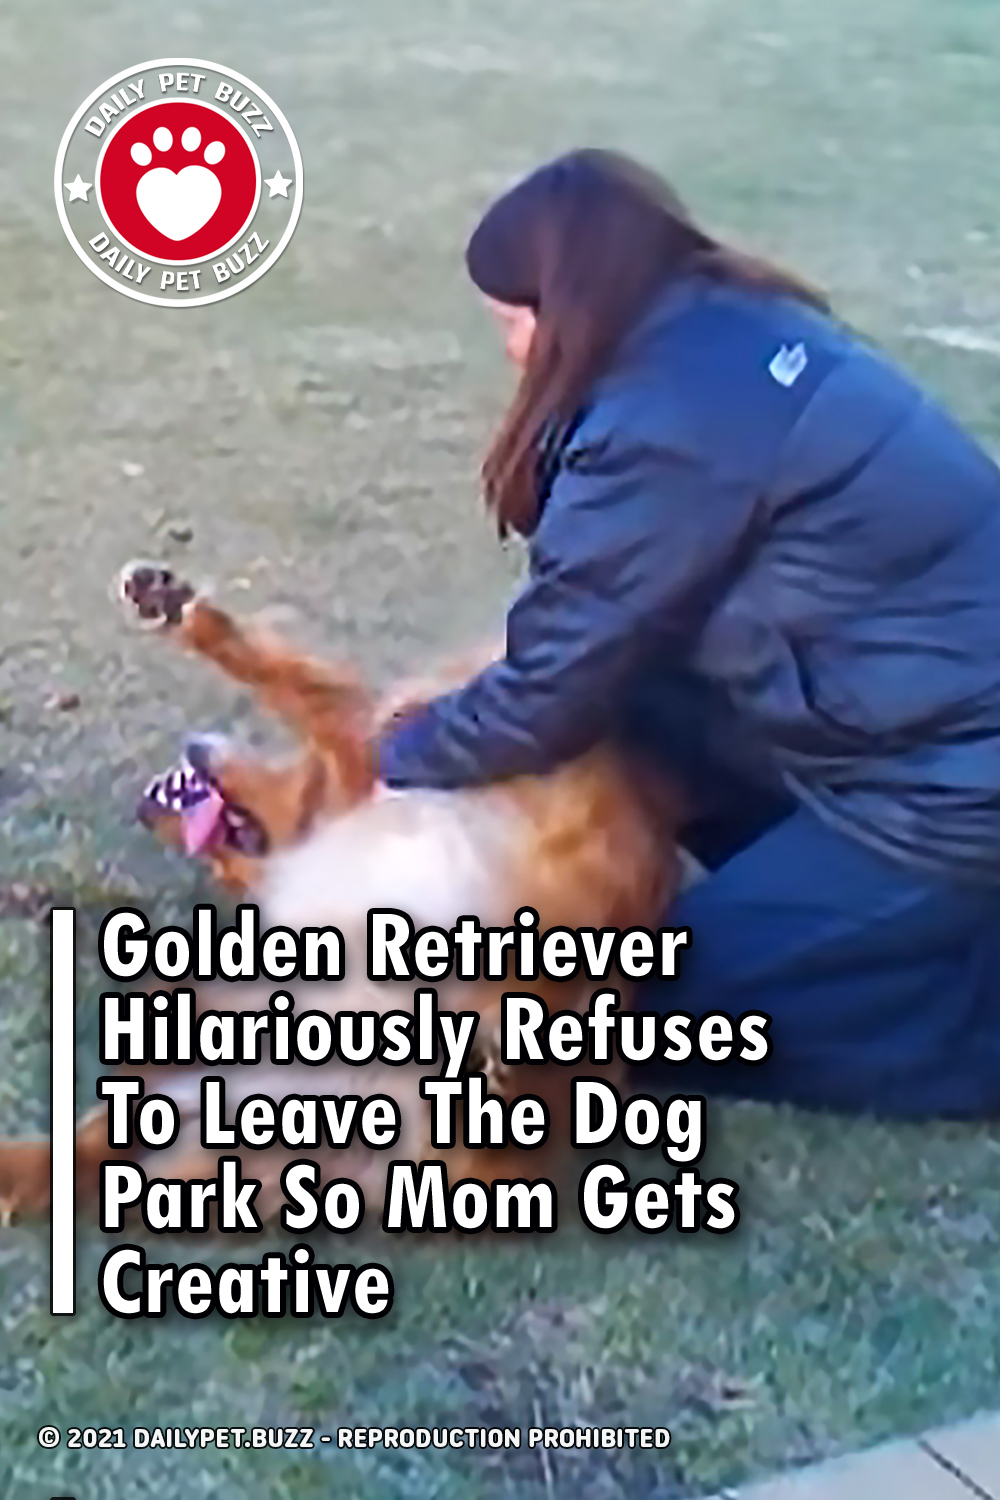 Golden Retriever Hilariously Refuses To Leave The Dog Park So Mom Gets Creative